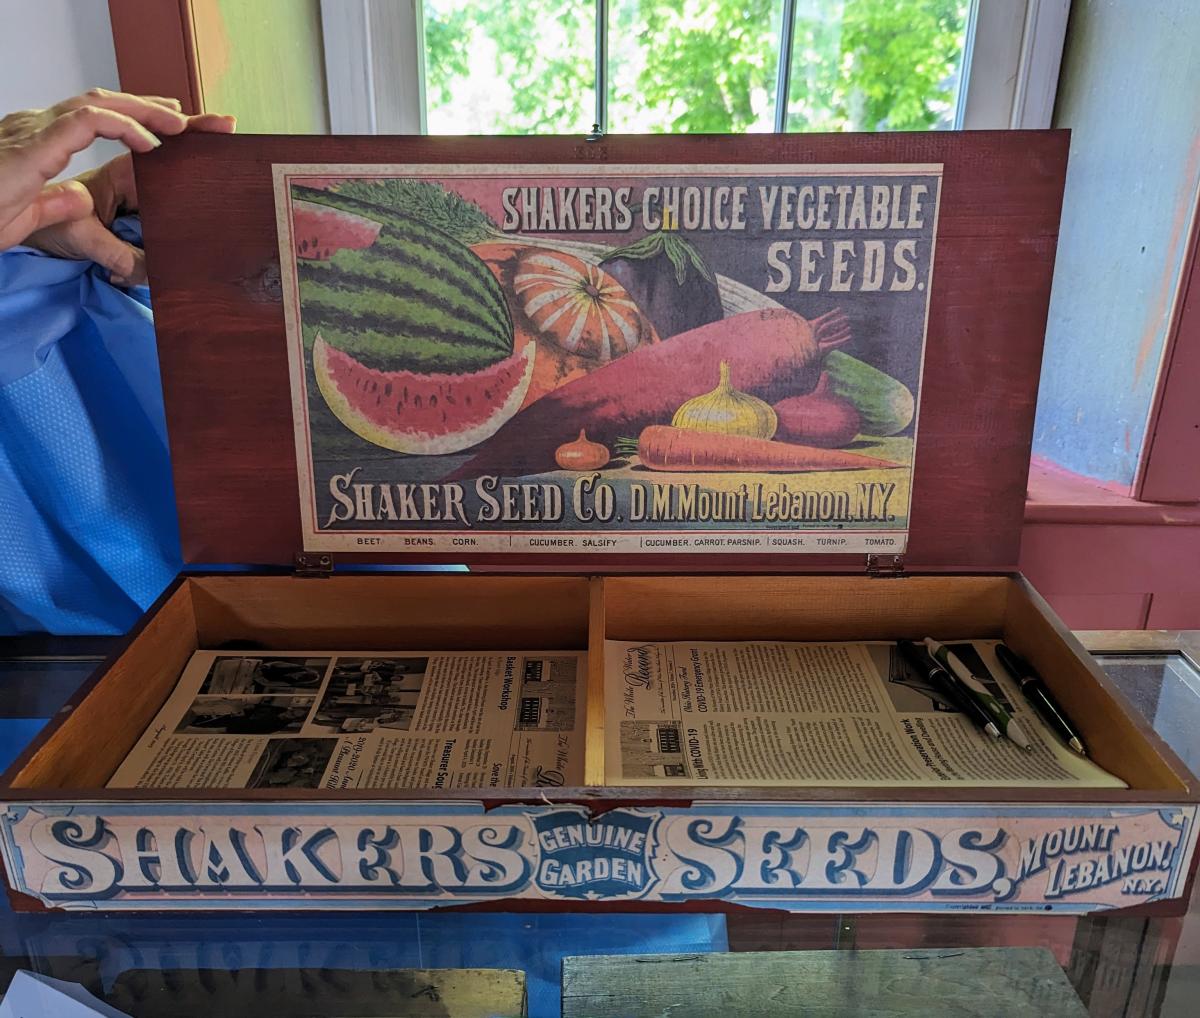 Image is of a Shaker Seed box that is made of wood and say's "Shaker Seeds" with magazine articles inside.